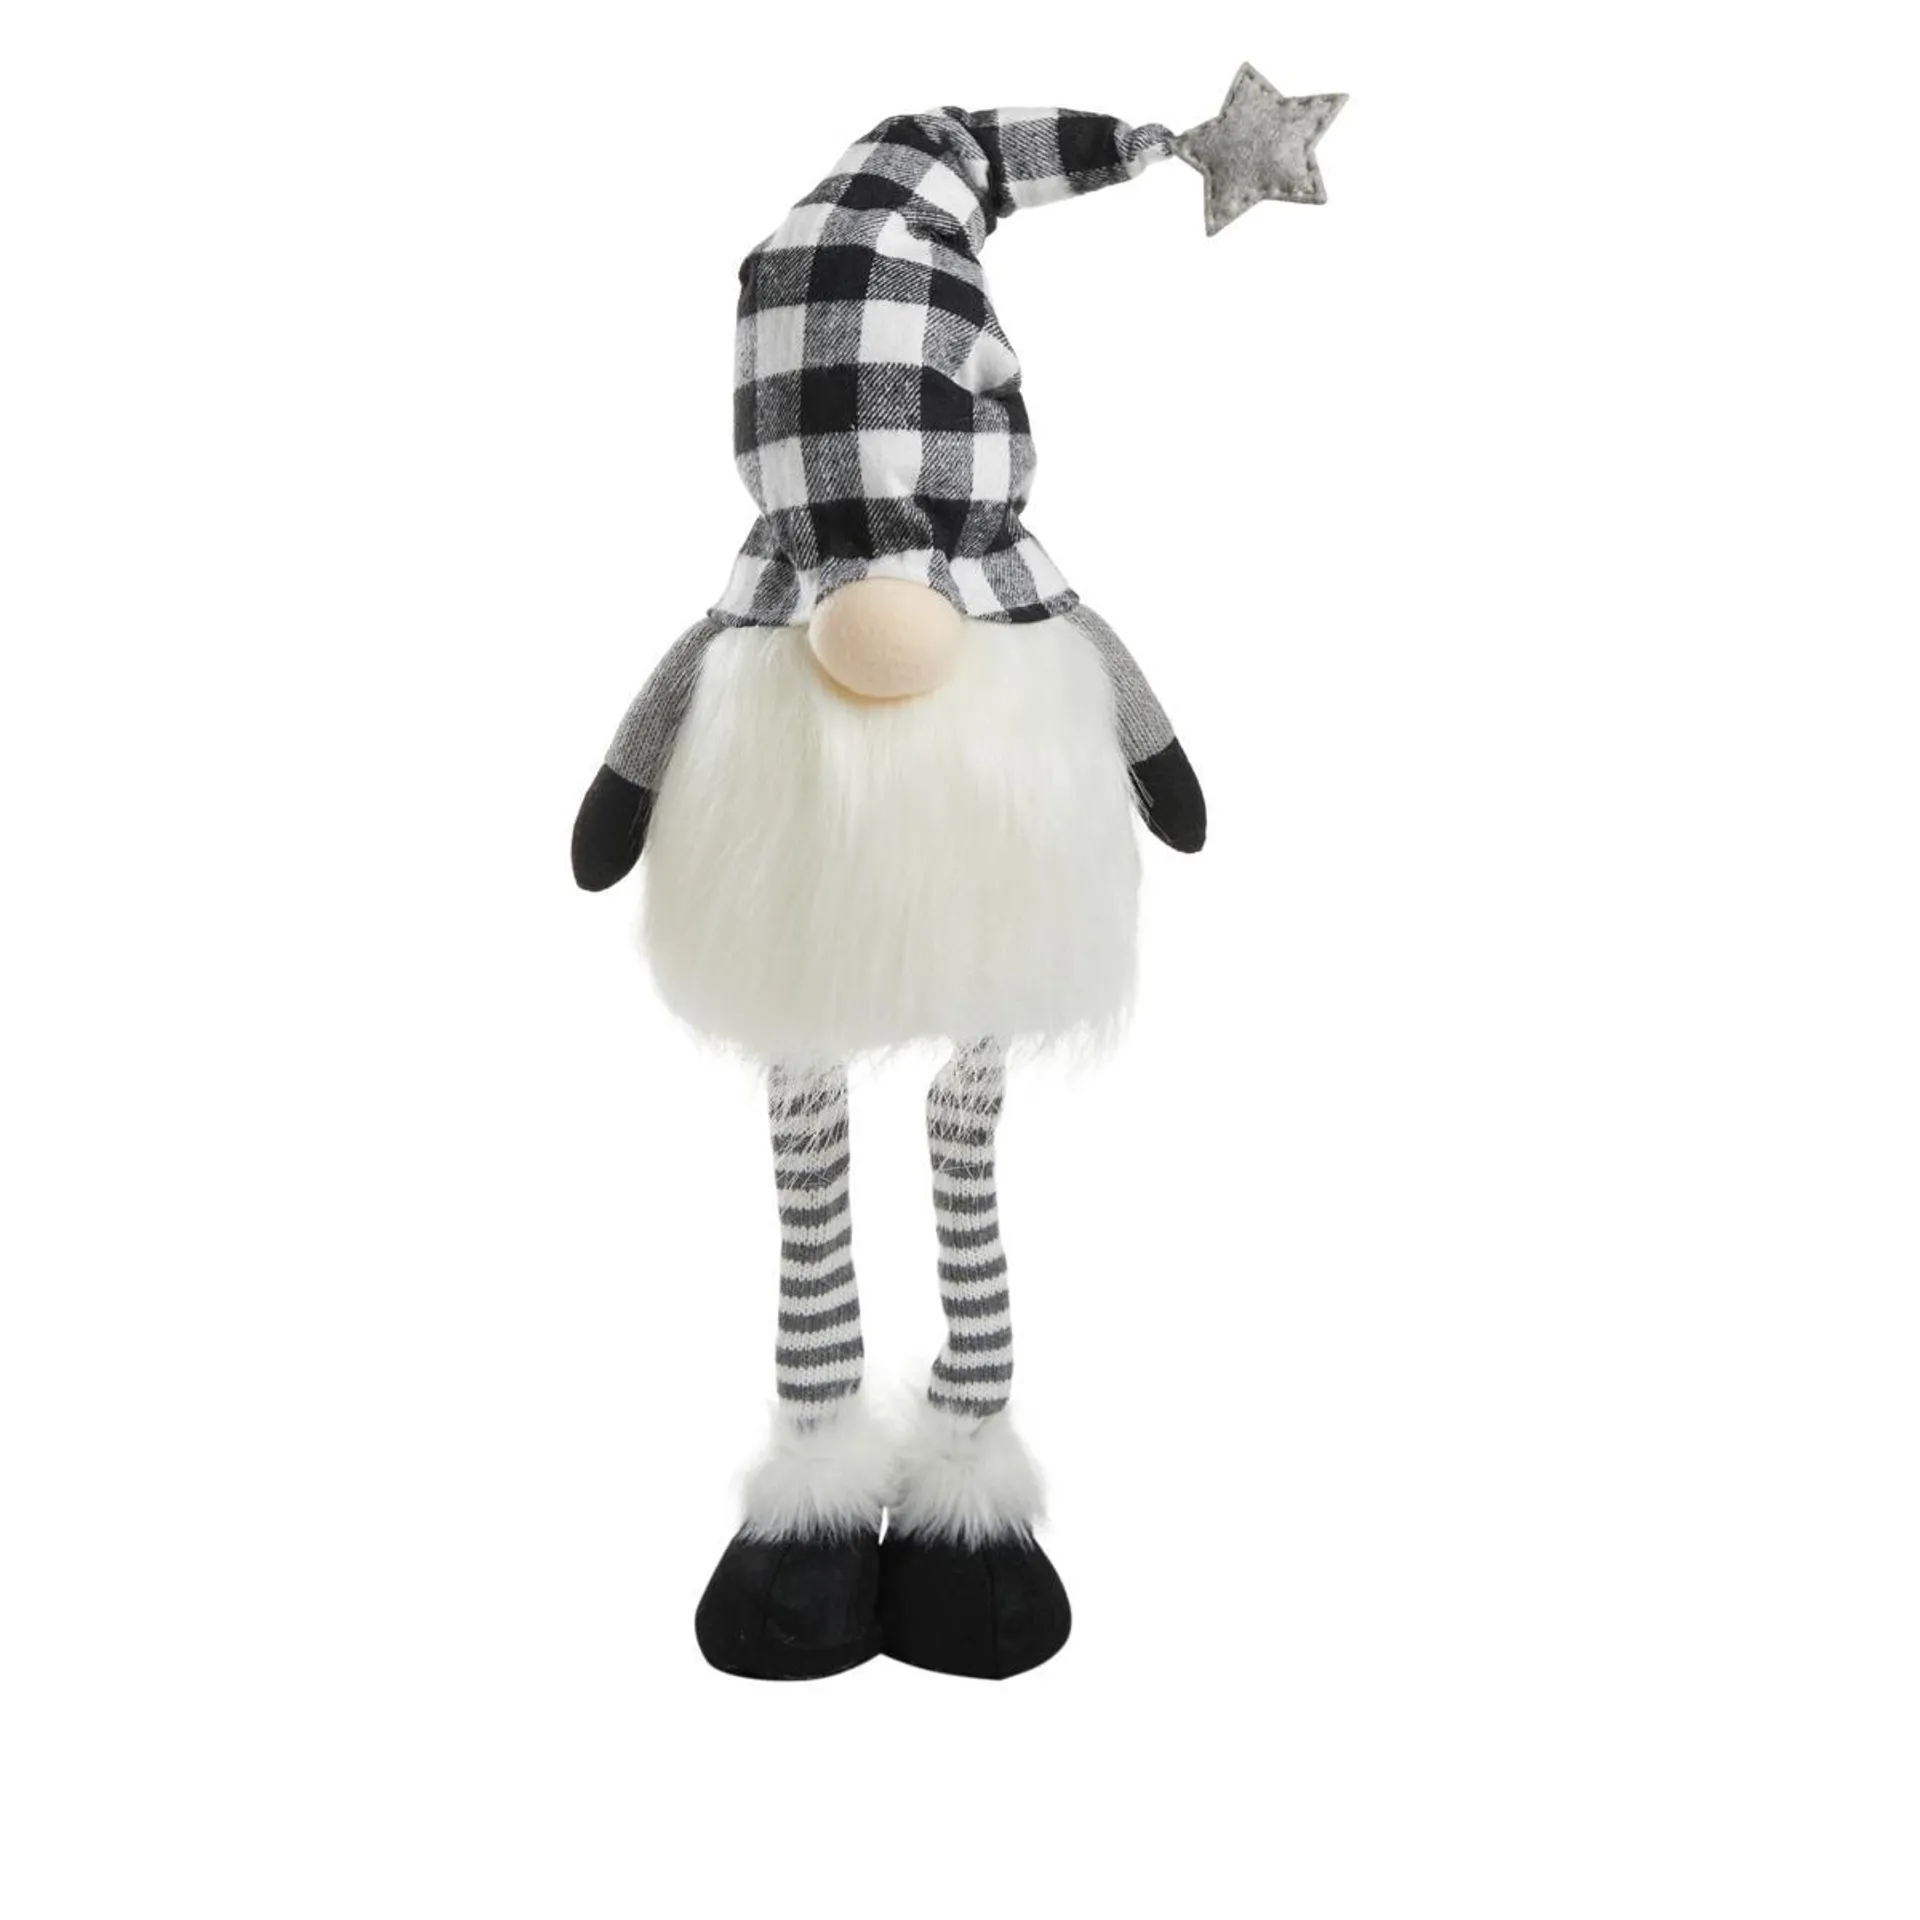 Winter Lane Gnome LED Shelf Sitter with 6-Hour Timer